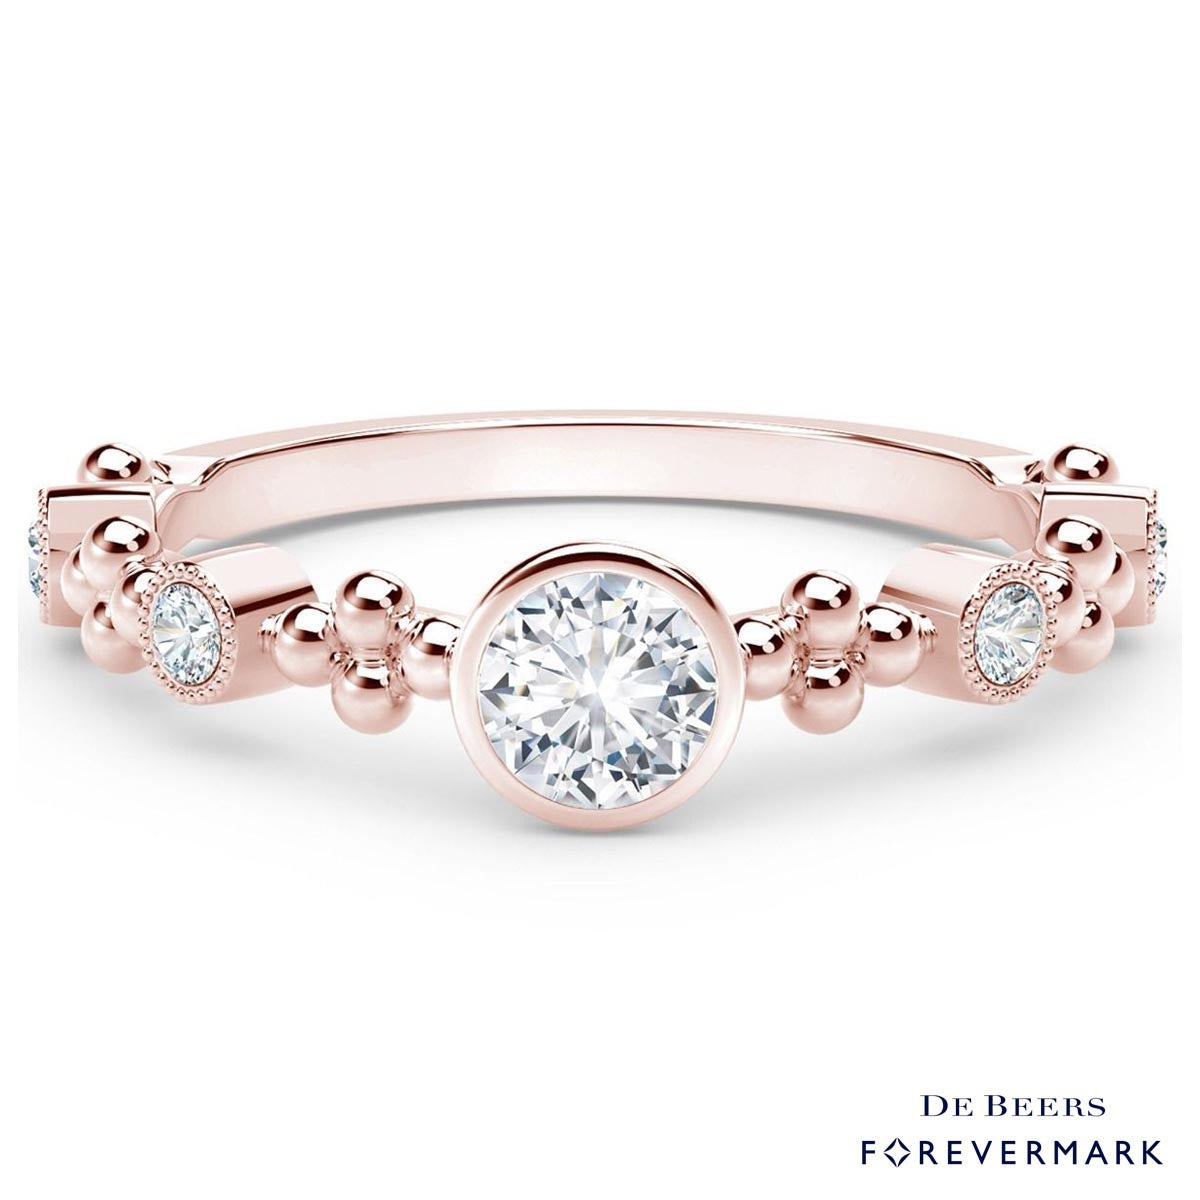 De Beers Forevermark Tribute Collection Feminine Diamond Ring in 18kt Rose Gold (1/5ct tw)